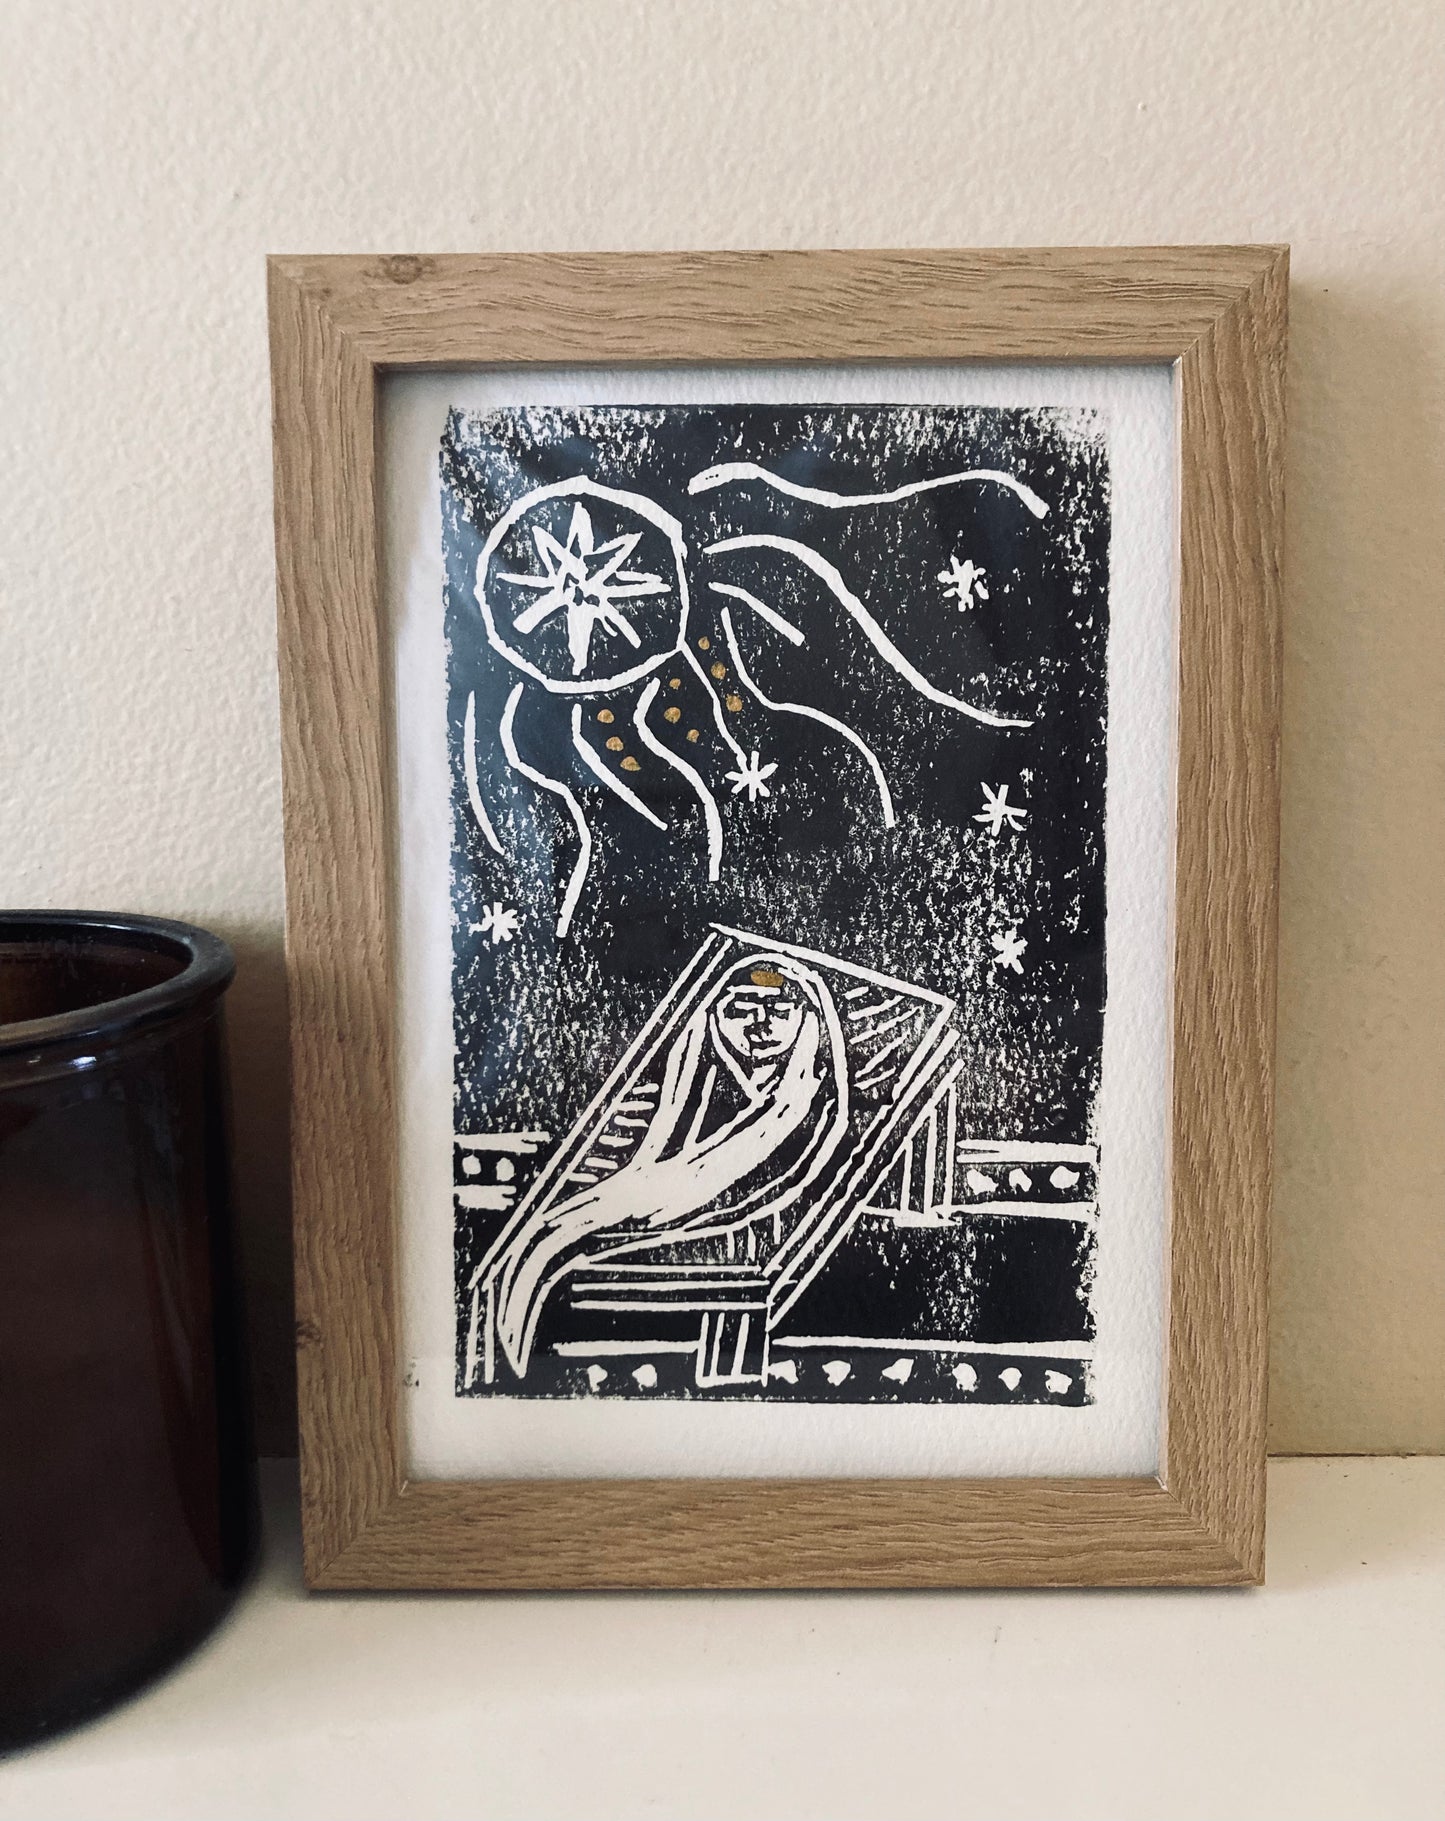 2. The Crib. The Cross. The Cup(Eucharist) block print collection